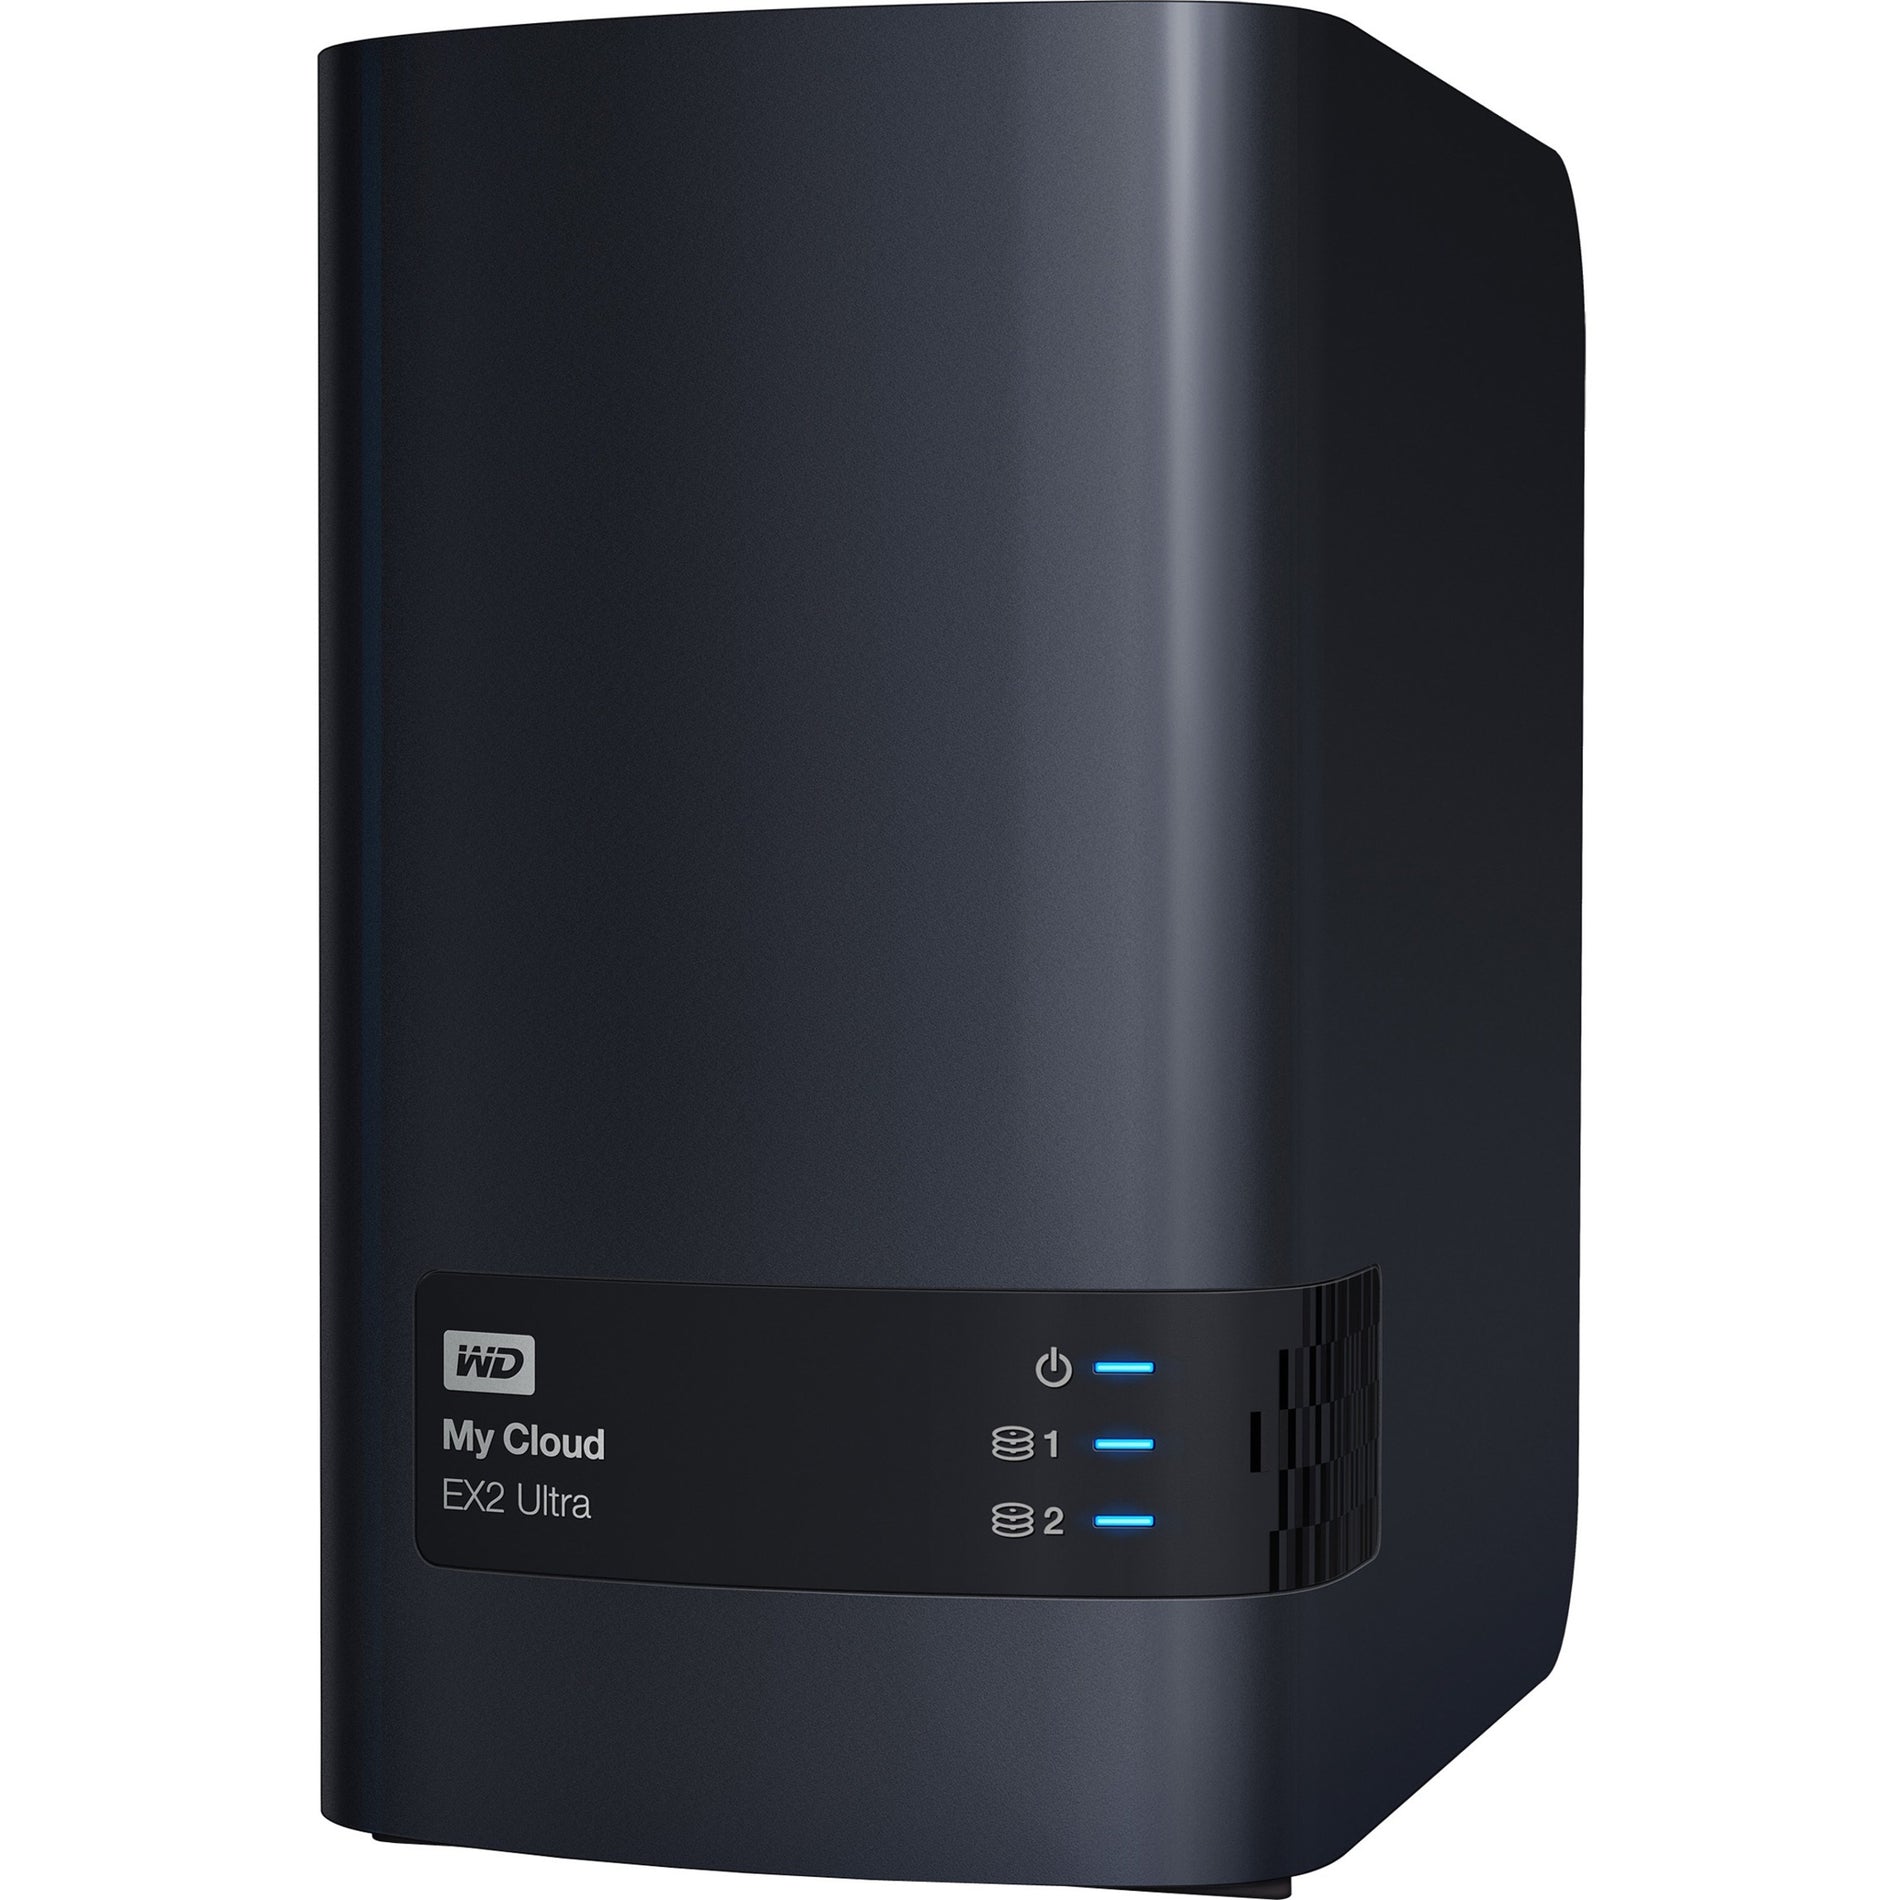 WD WDBVBZ0080JCH-NESN My Cloud EX2 Ultra Network Attached Storage - NAS, 8TB Total Hard Drive Capacity Installed